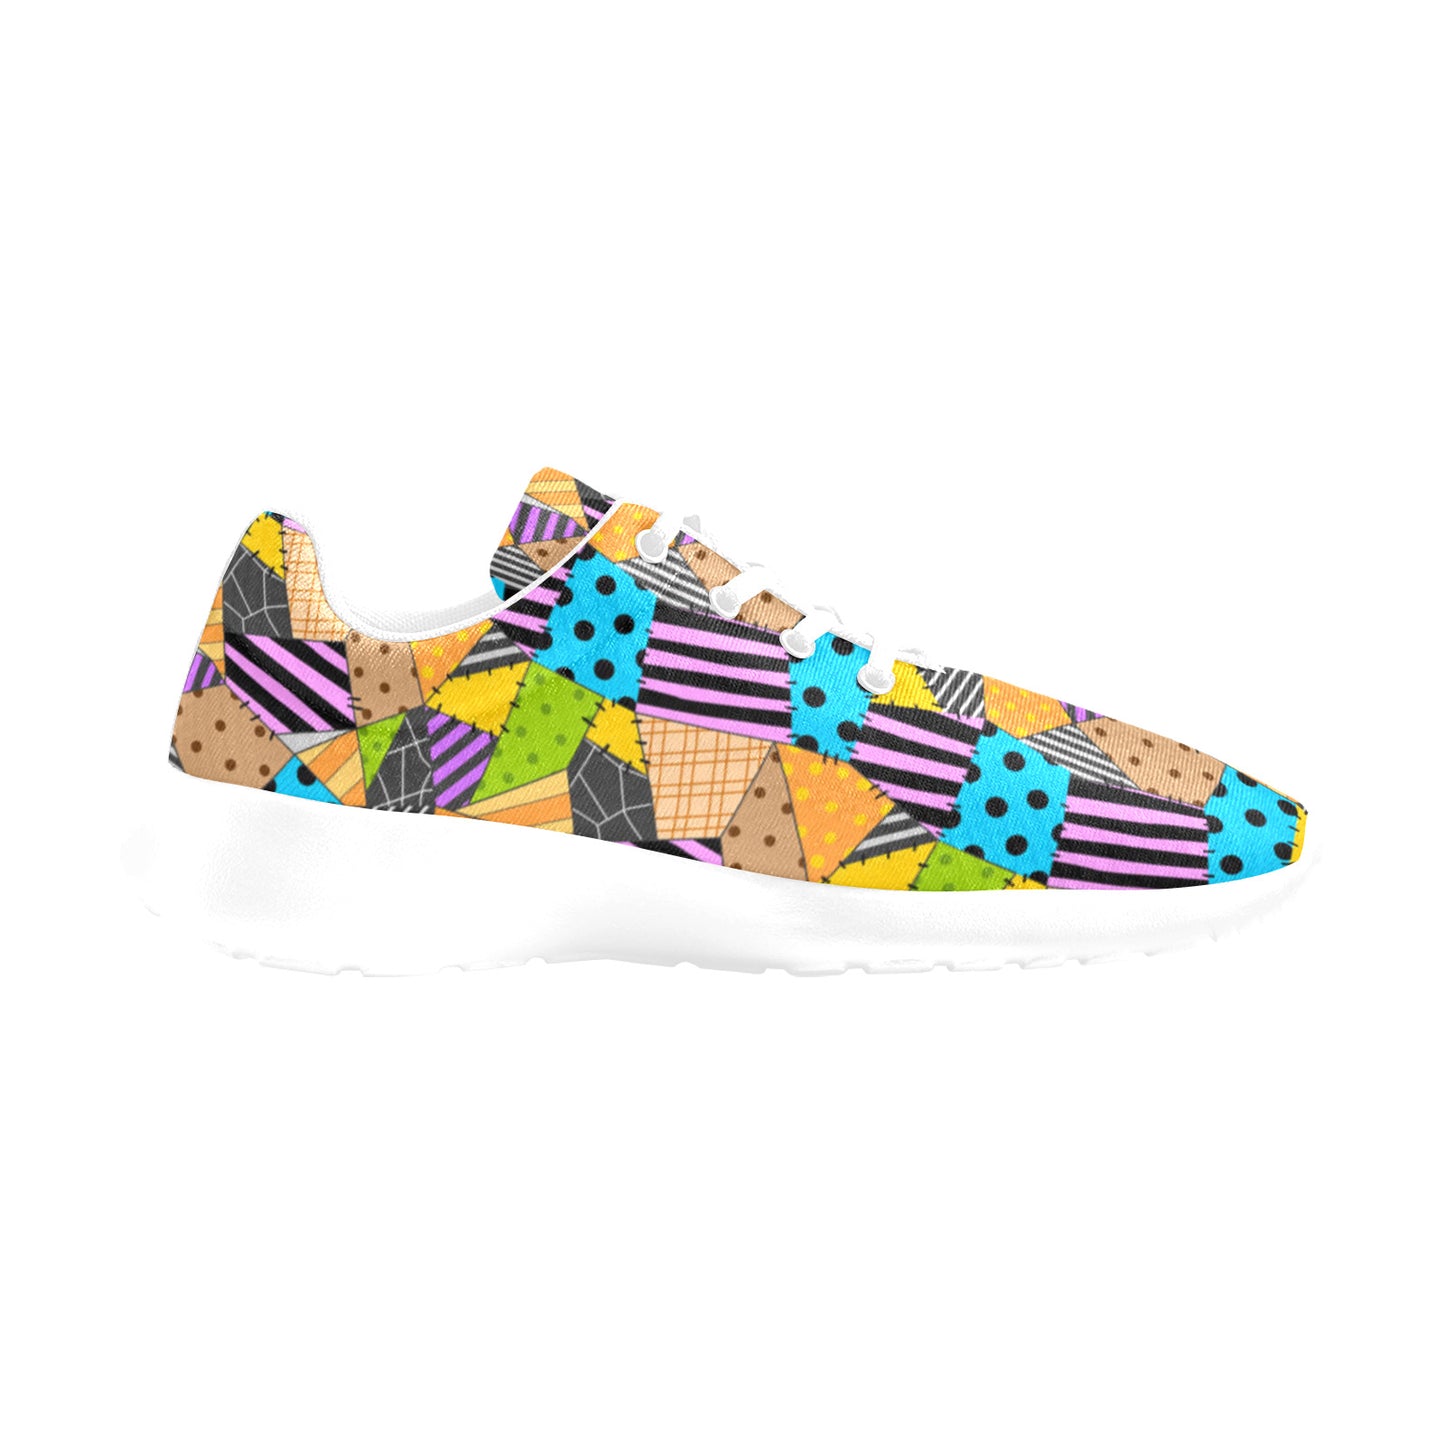 Colorful Rag Doll Men's Athletic Shoes